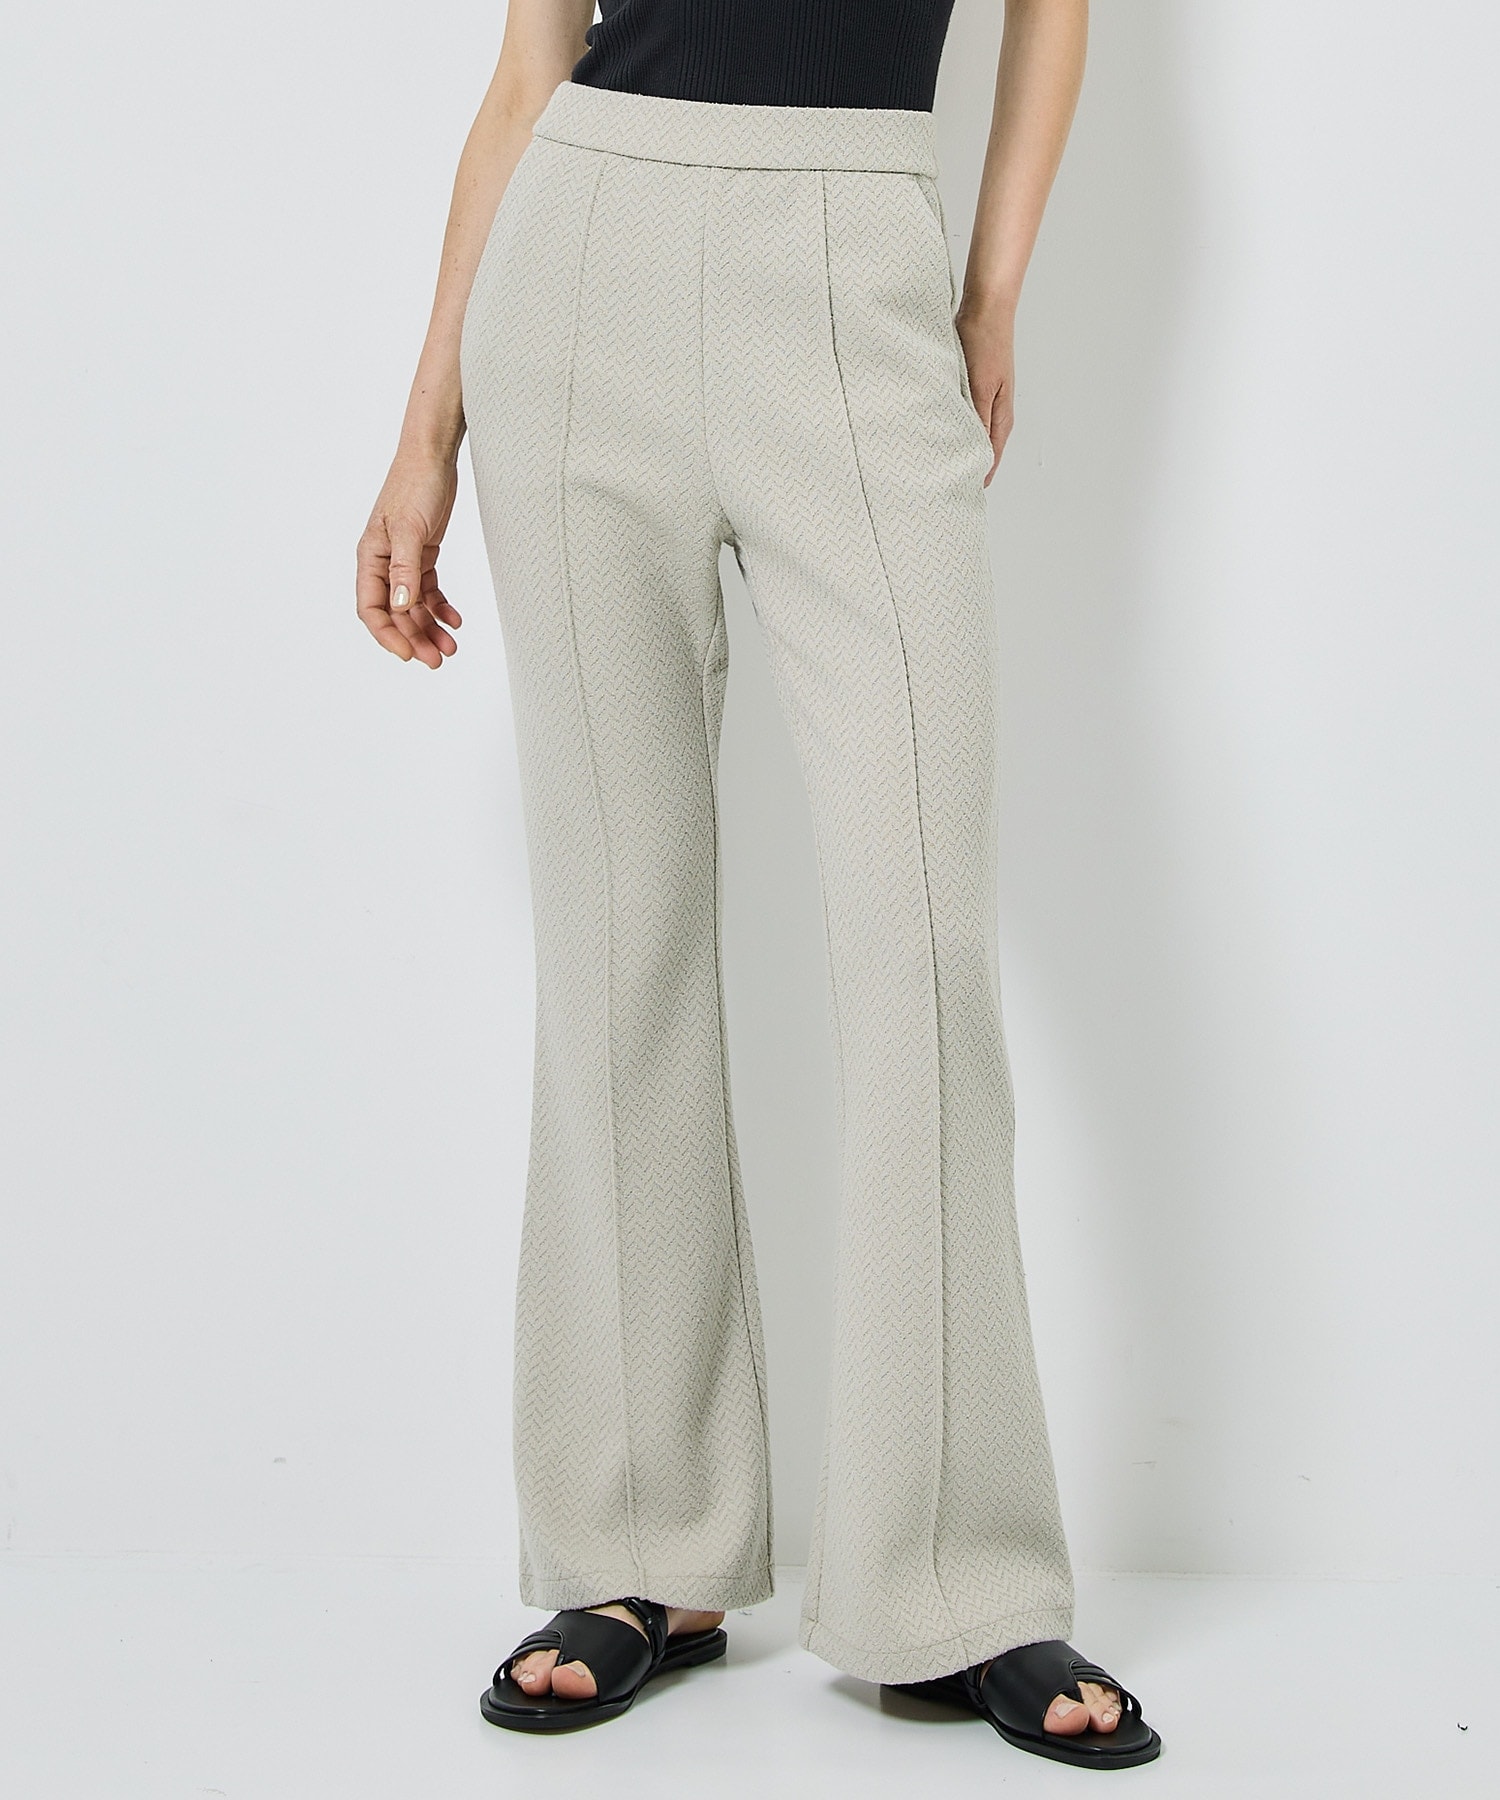 Almighty Stretch Flare Pants STUDIOUS